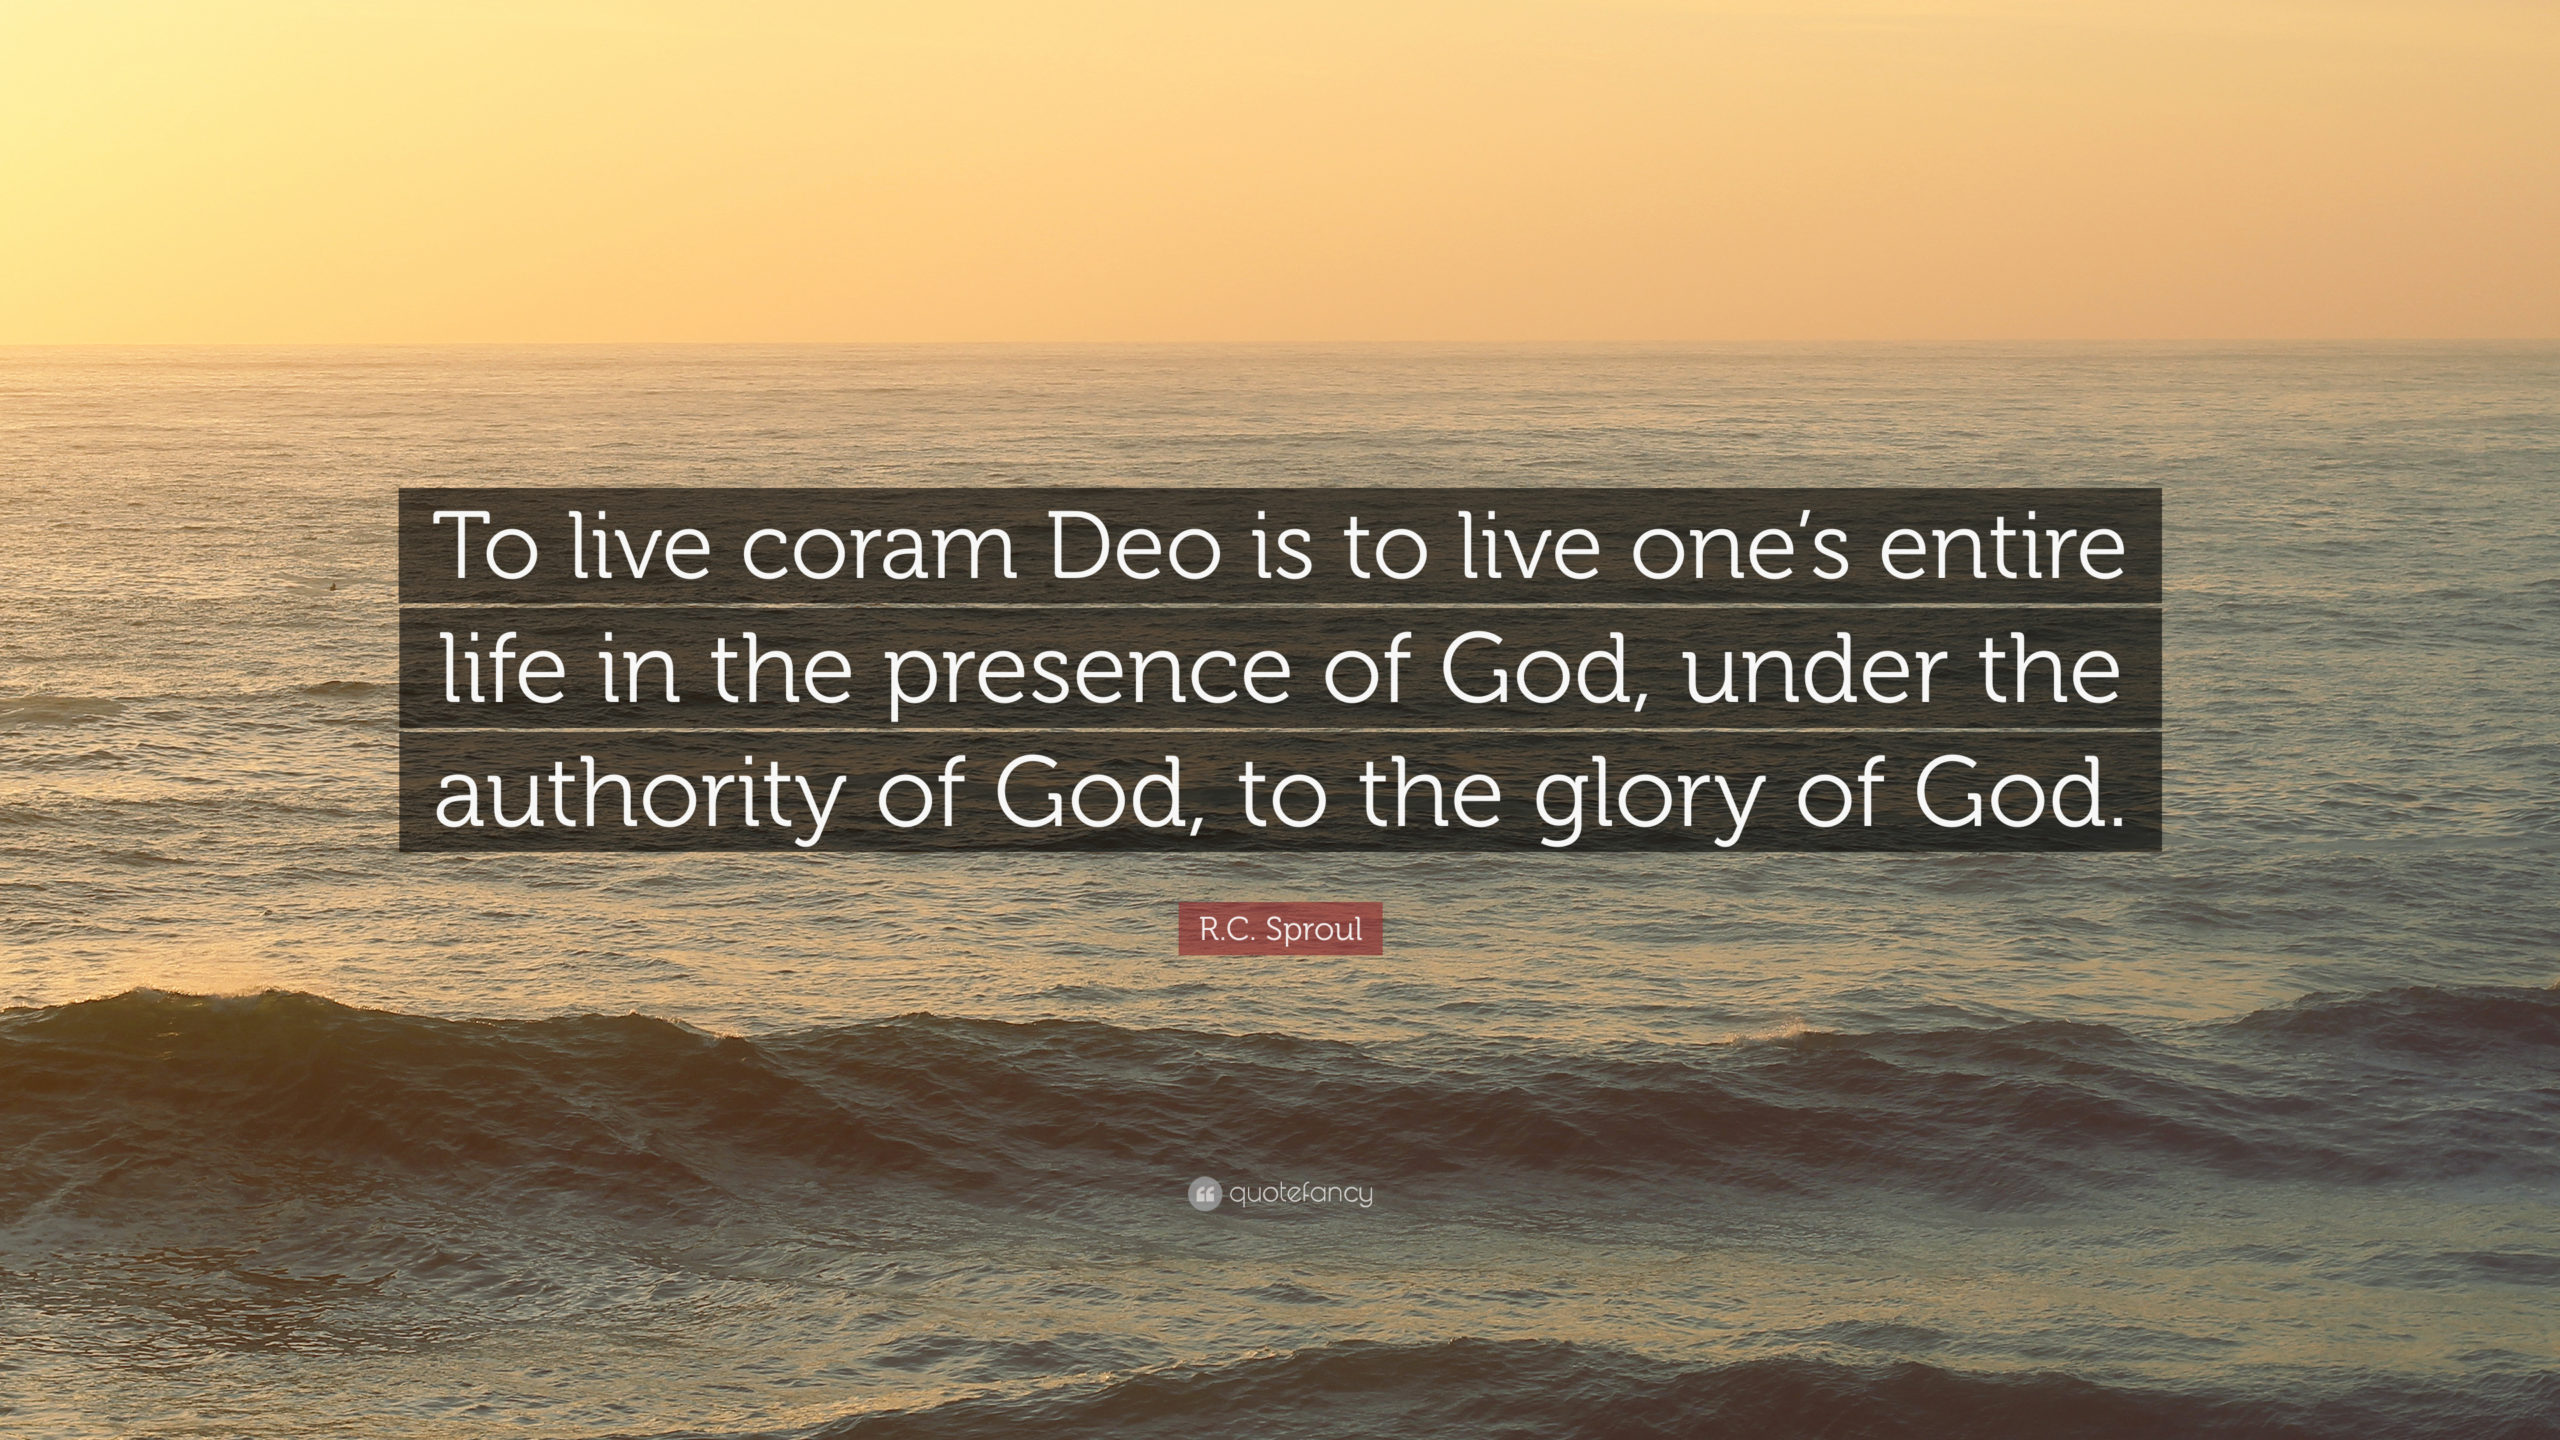 “To live coram Deo is to live one’s entire life in the presence of God, under the authority of God, to the glory of God.” R.C. Sproul